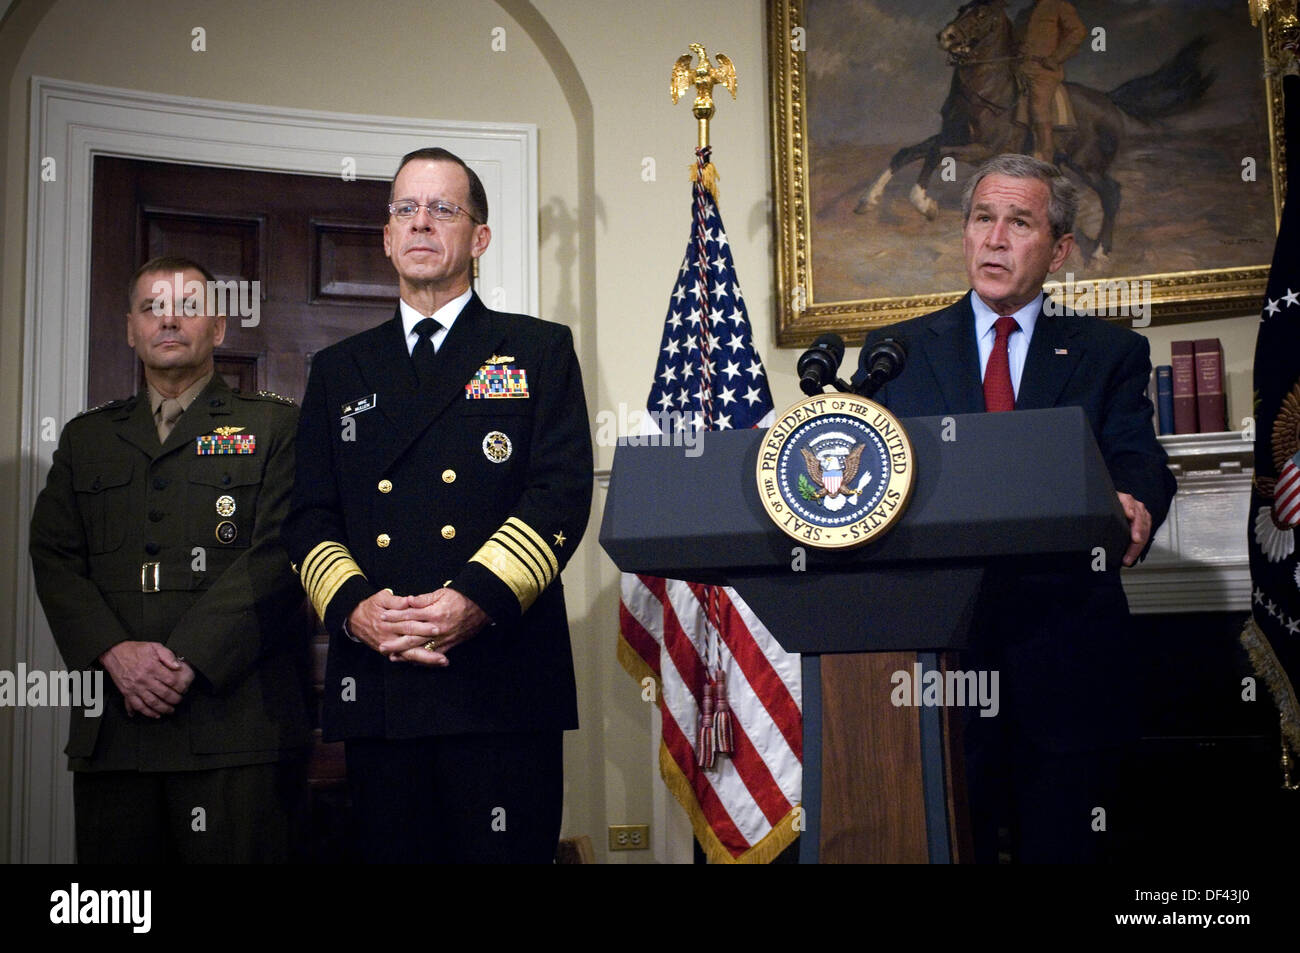 United States President George W. Bush (right) announces the nomination of Admiral Mike Mullen (2nd from left), U.S. Navy, and General James E. Cartwright as Chairman and Vice-Chairman of the Joint Chiefs of Staff, respectively, in the Roosevelt Room at the White House on June 28, 2007. Mullen is currently the Chief of Naval Operations and Cartwright is the Commander of the U.S. Strategic Command. Cartwright is a target of a Justice Department investigation into a leak of information about a covert U.S.-Israeli cyberattack on Iranâ??s nuclear program. Mandatory Credit: Chad J. McNeeley / DoD v Stock Photo